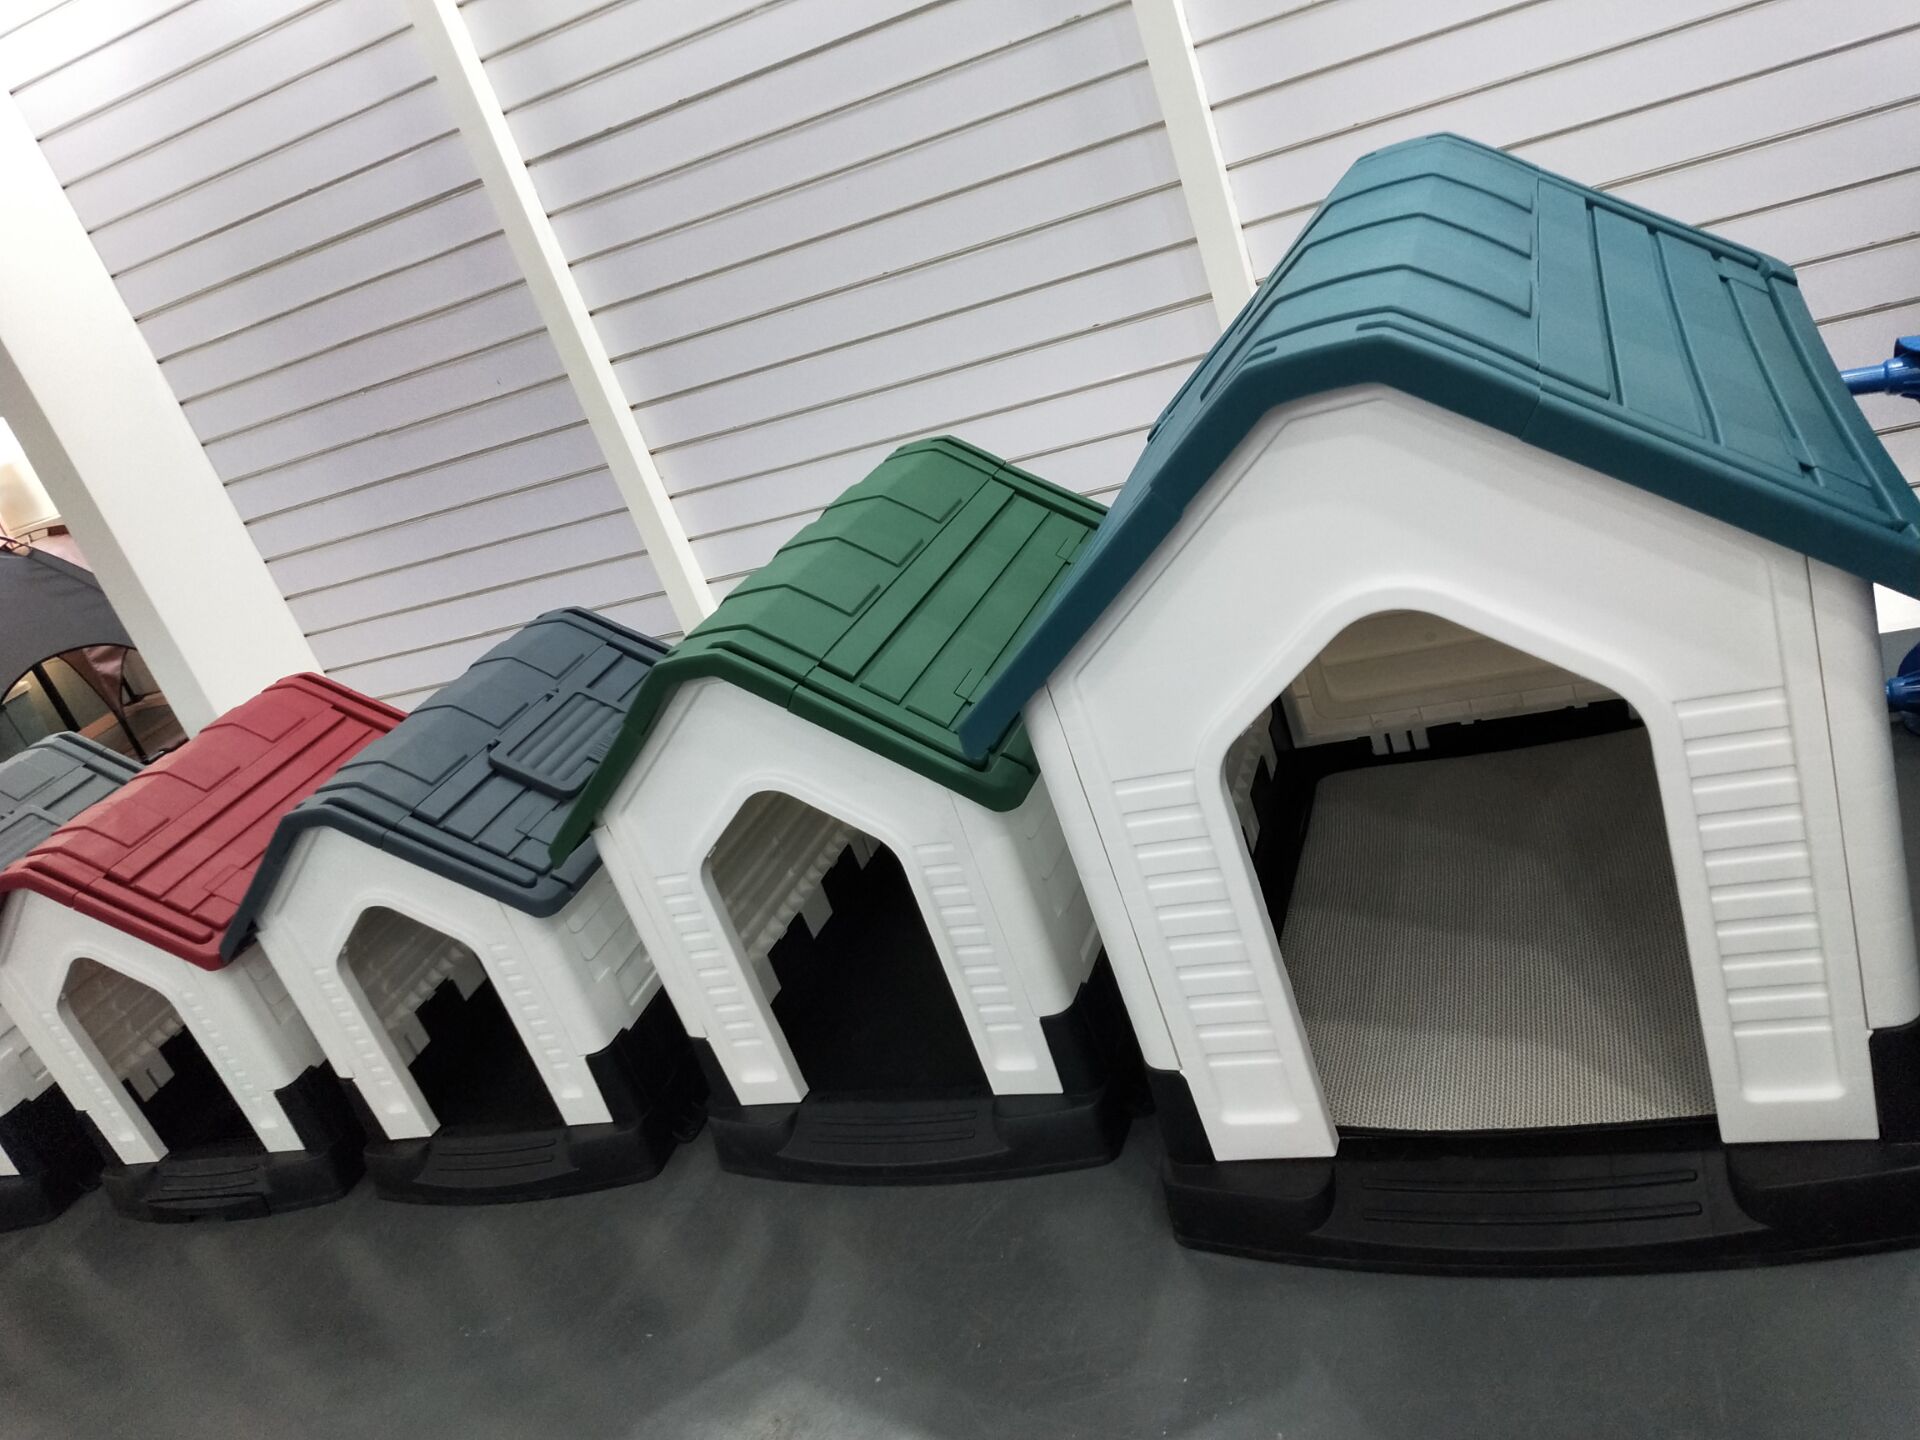 The design demand for the pet products-plastic dog house